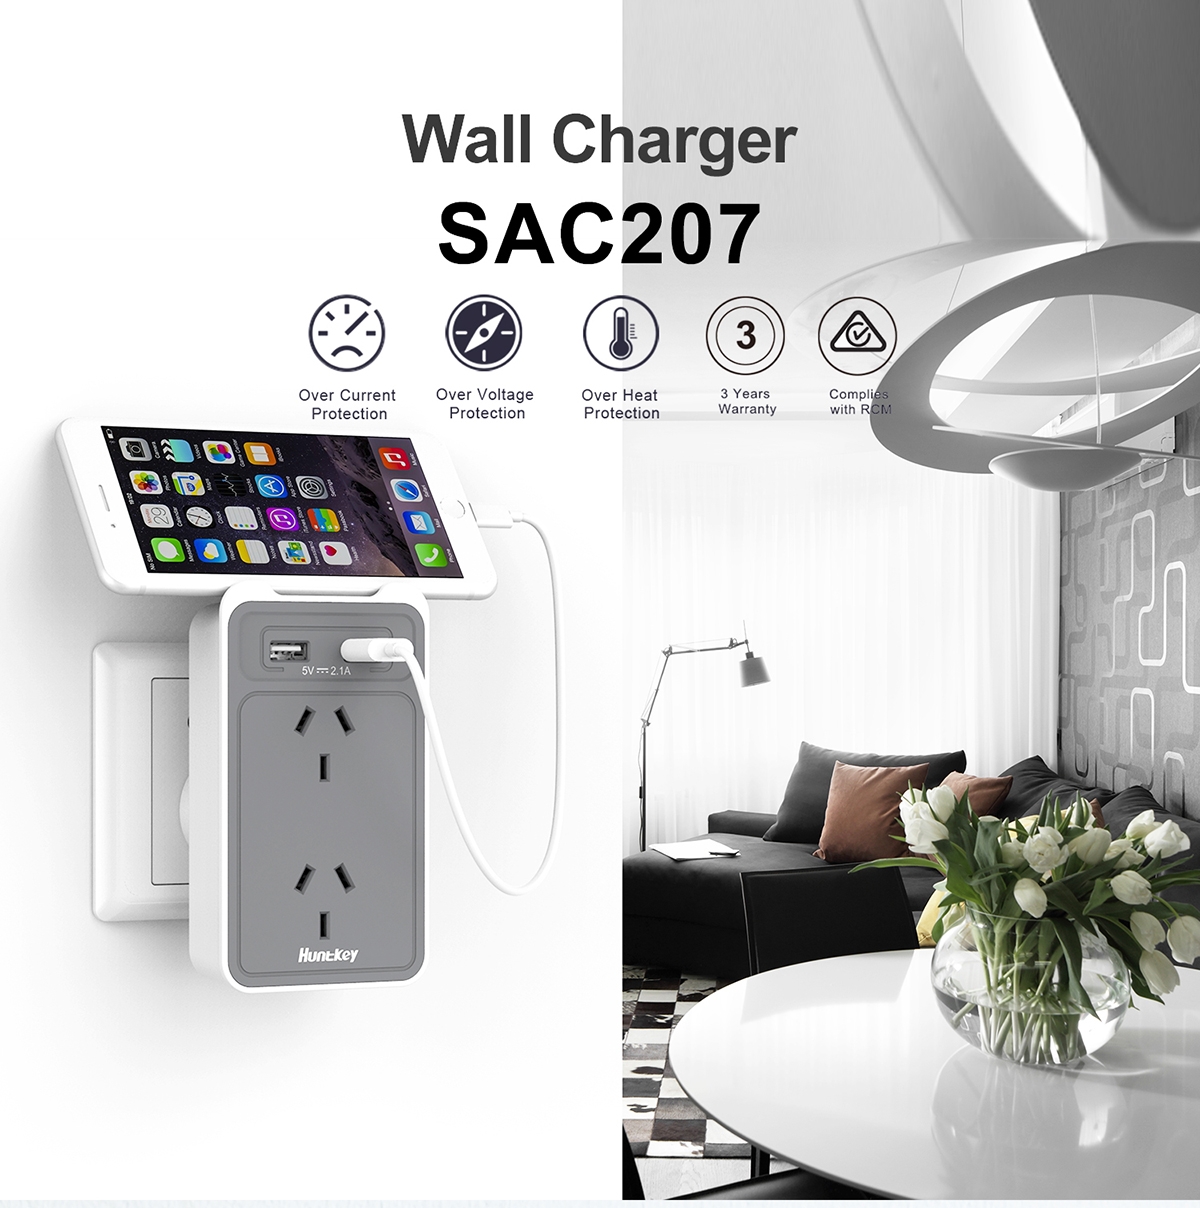 HUNTKEY SAC207 SMART WALL CHARGER with 2 AC and 2 USB combined 2.4A (TWIN PACK) 1